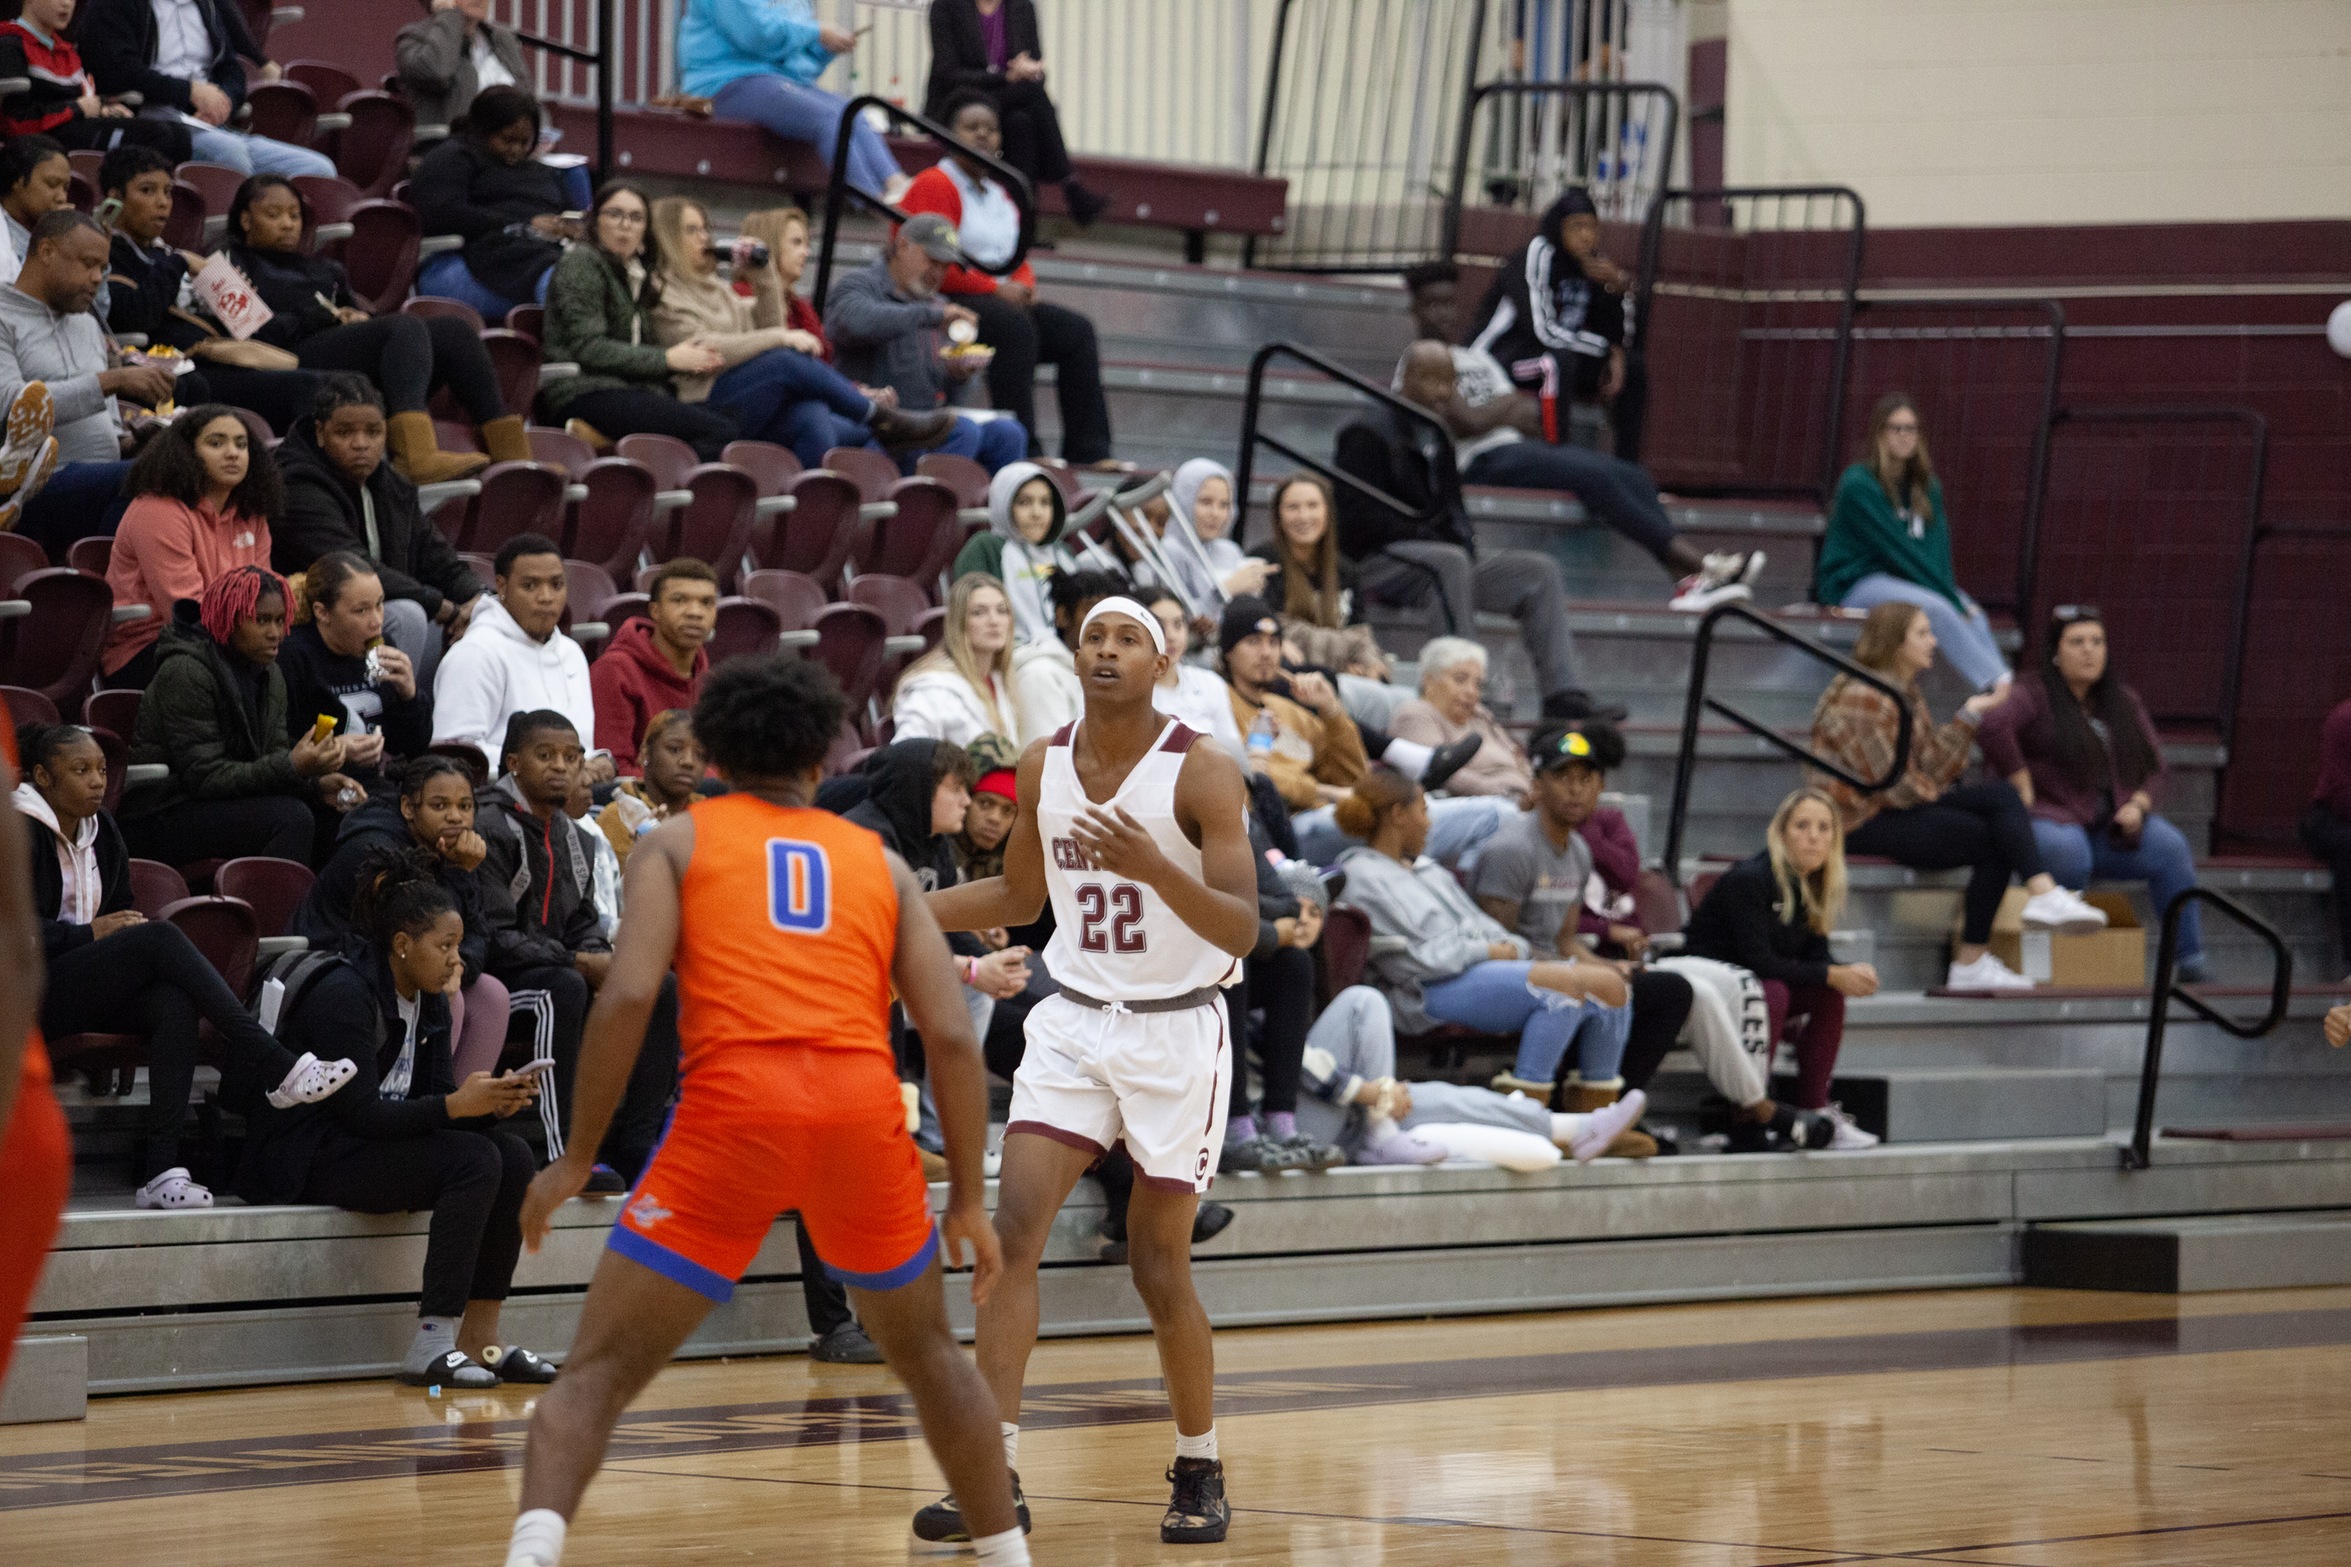 Tykeem Singleton and the Gents will go for a season sweep of Austin College on Saturday in Sherman, Texas.